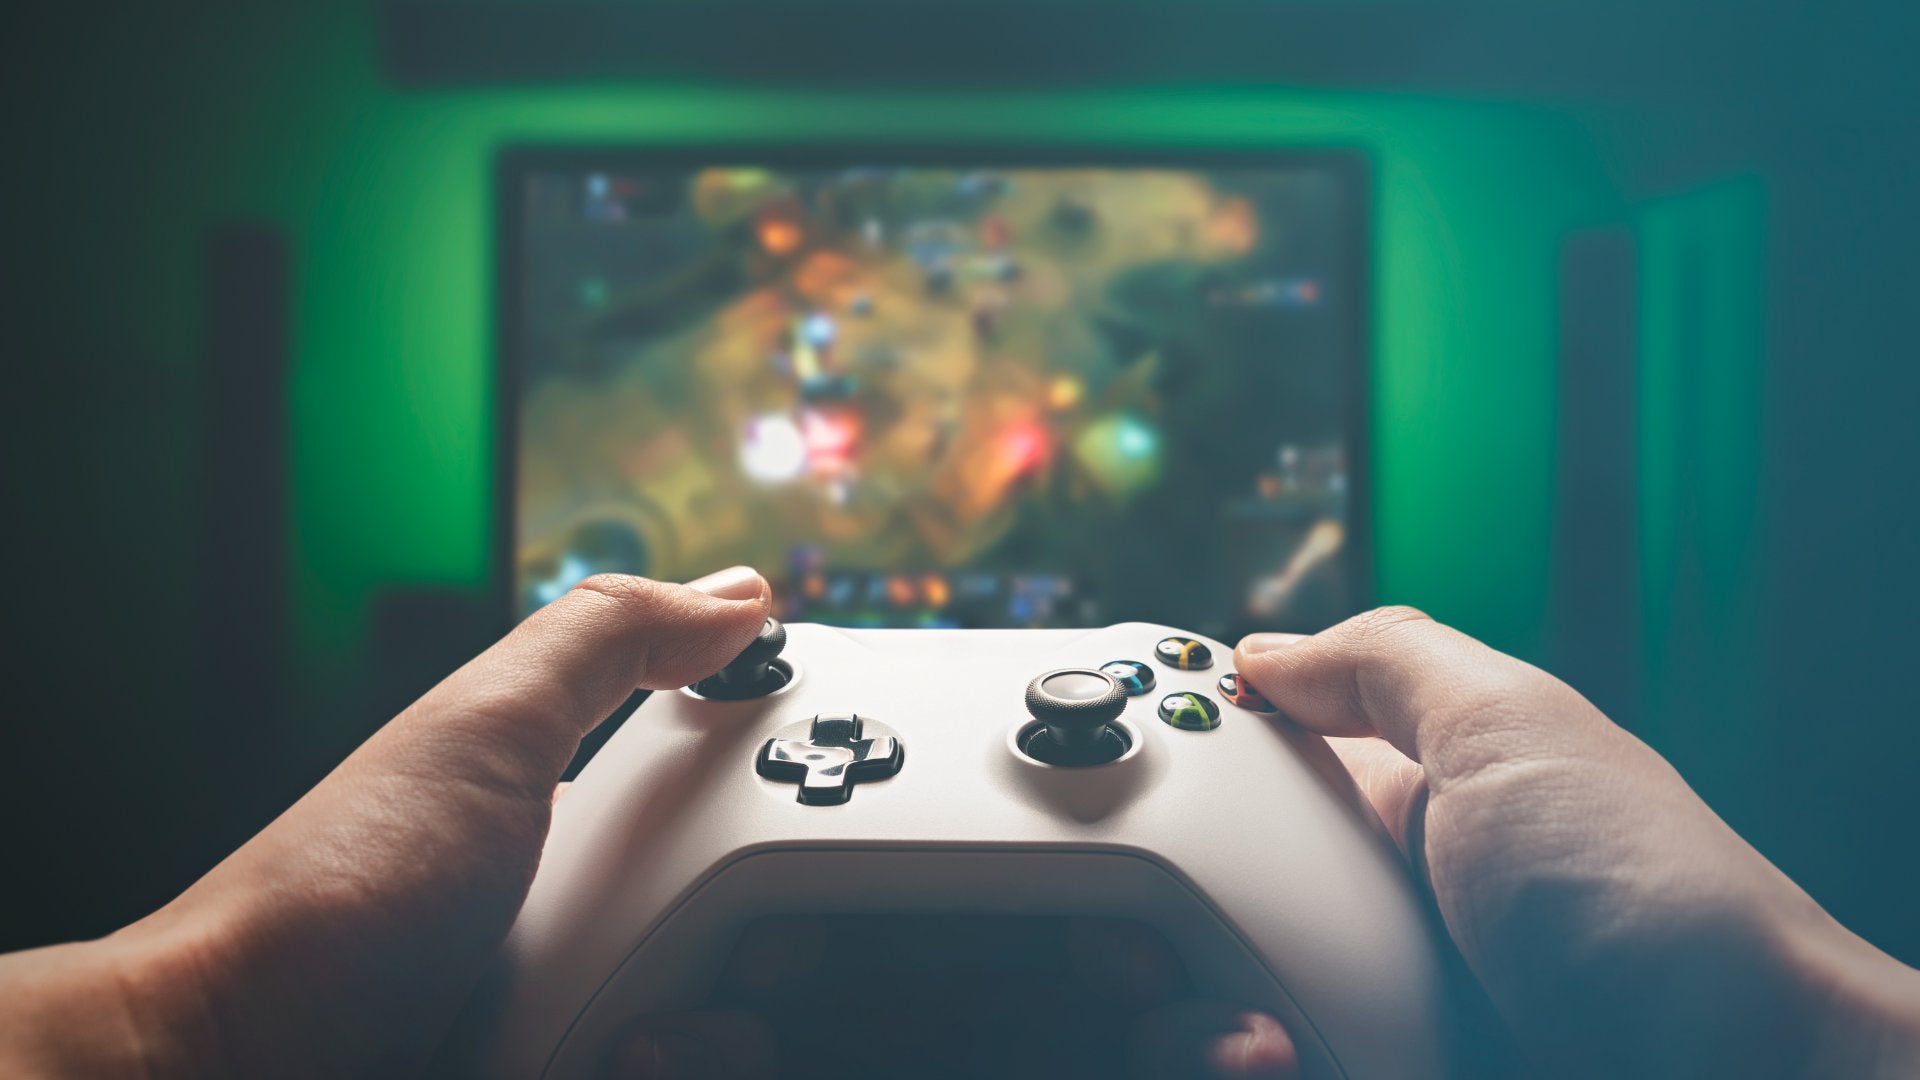 BrainTree Nutrition-Blog-Exploring the Cognitive Benefits of Video Games